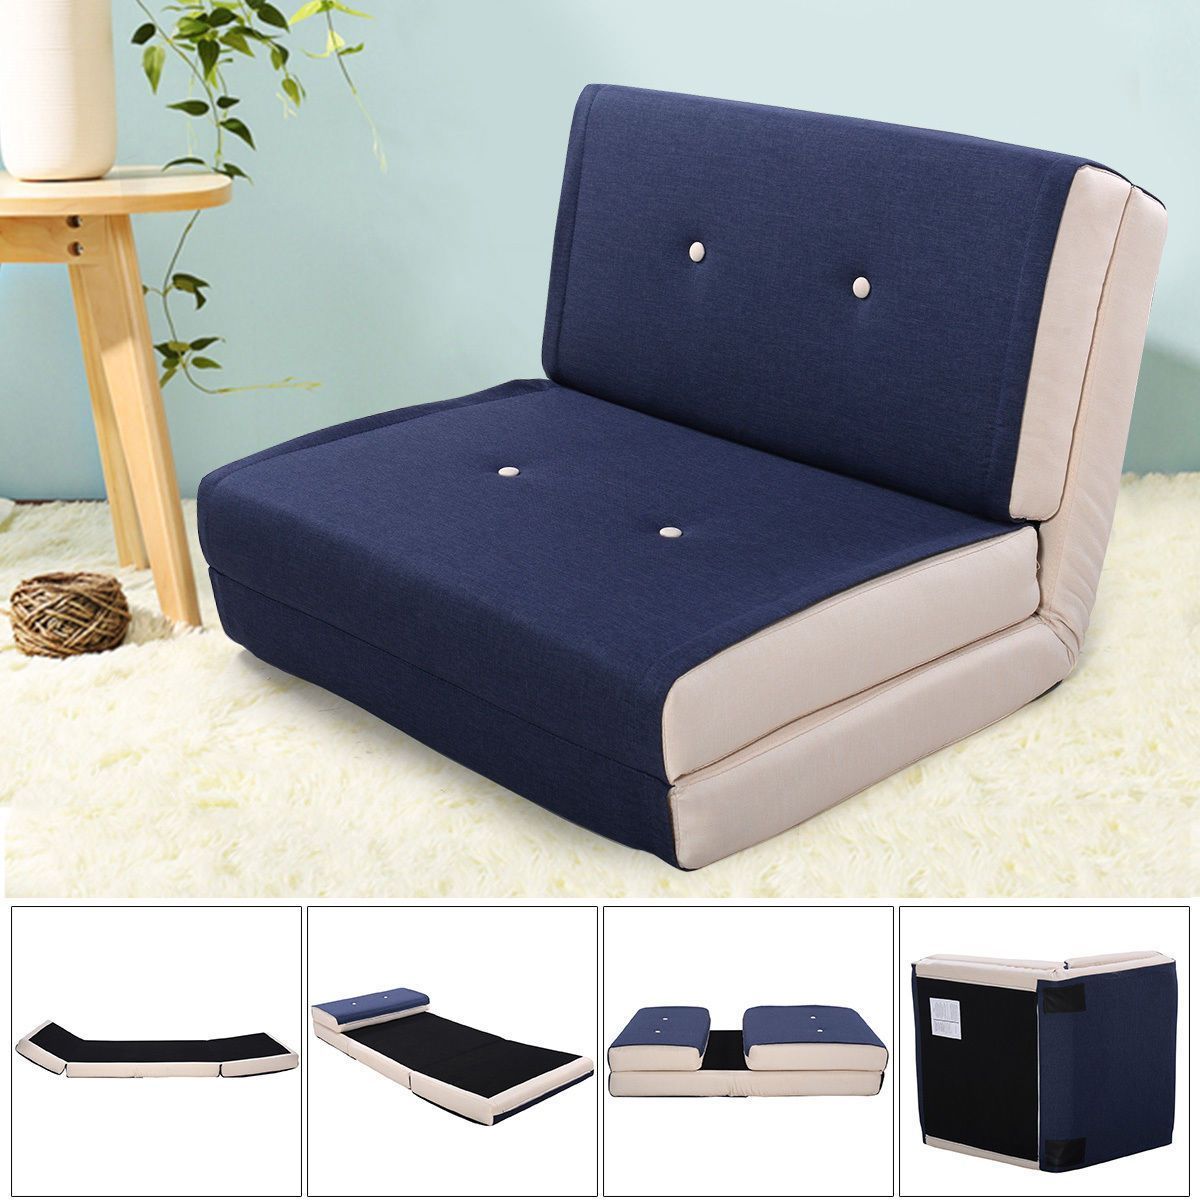 Giantex Fold Down Chair Flip Out Lounger Convertible Within Fold Up Sofa Chairs (View 1 of 15)